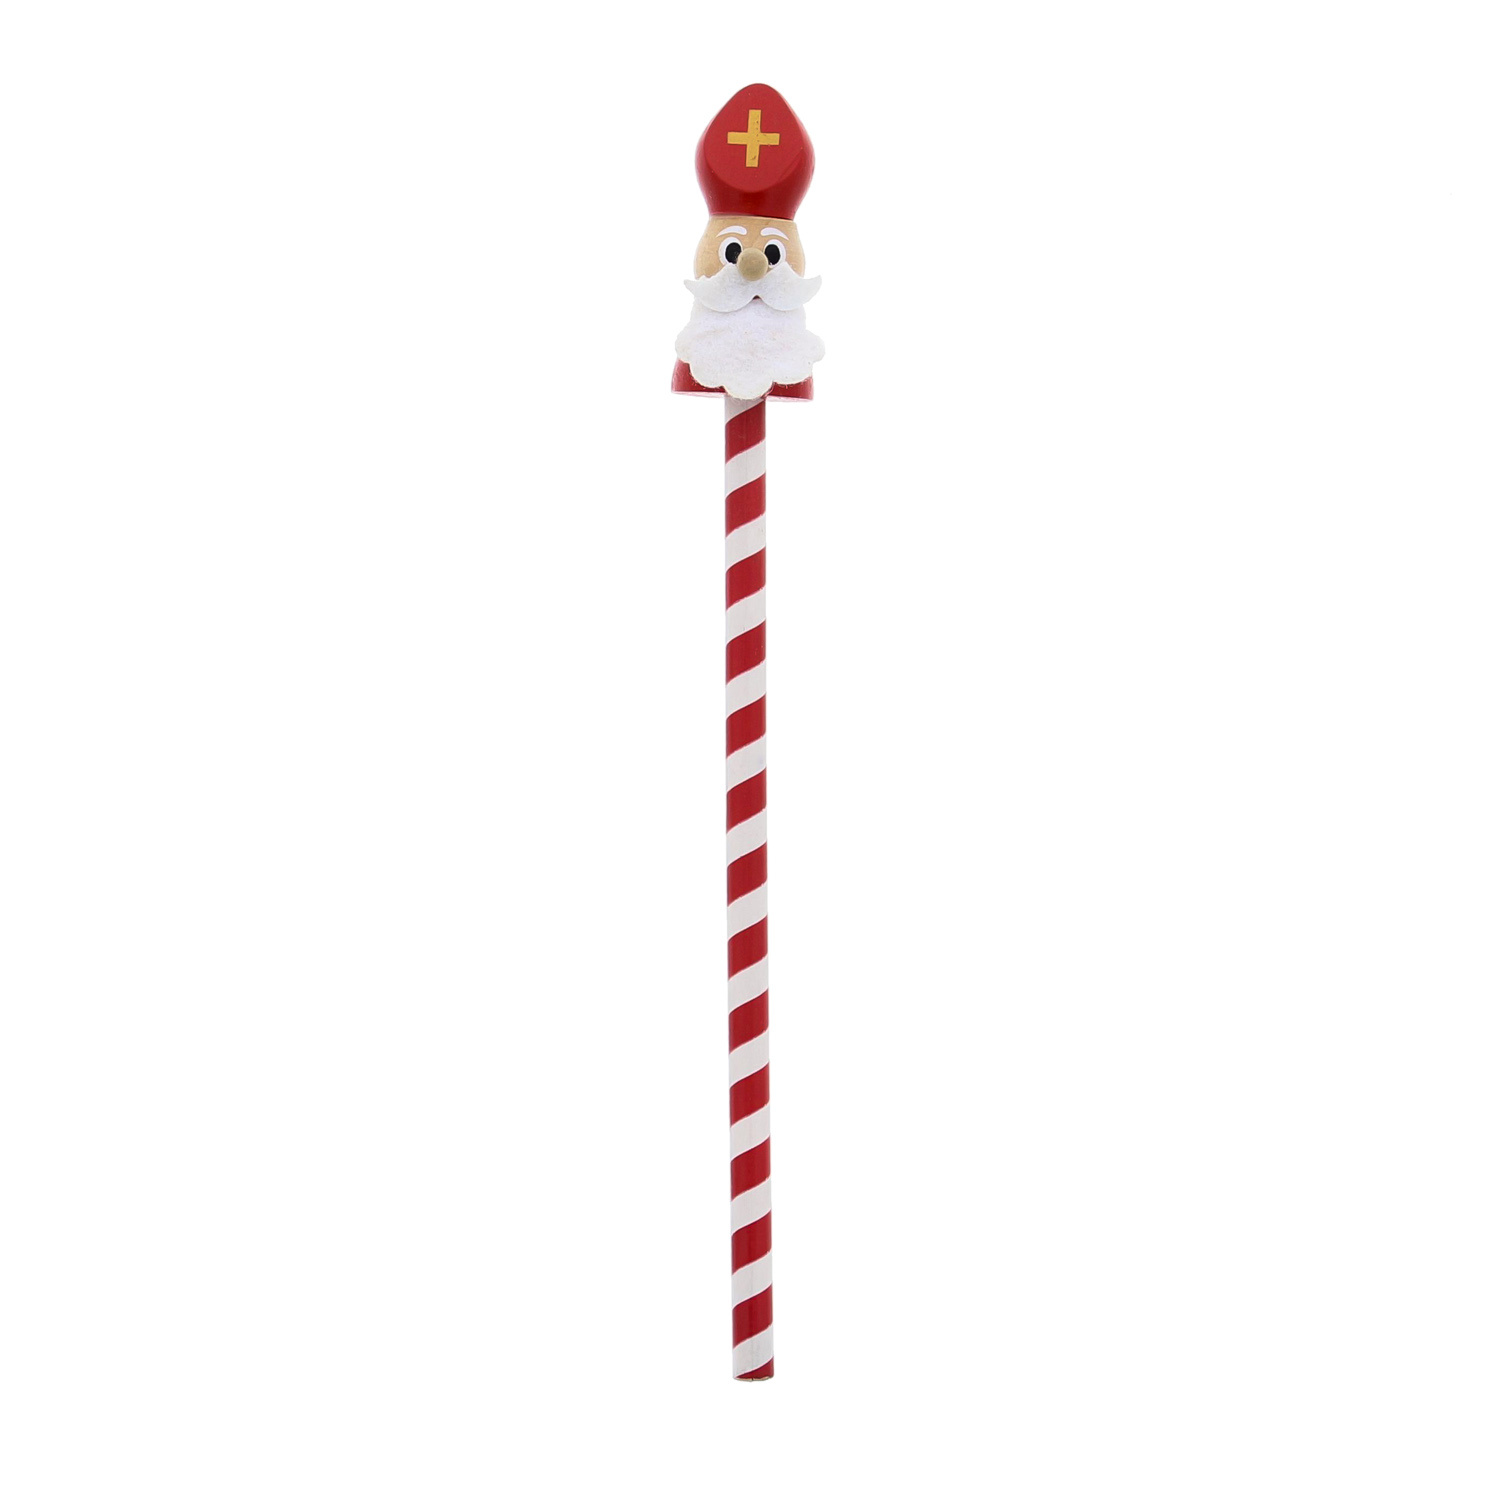 Pencil Saint striped red-white - 25*30*210 mm - 48 pieces